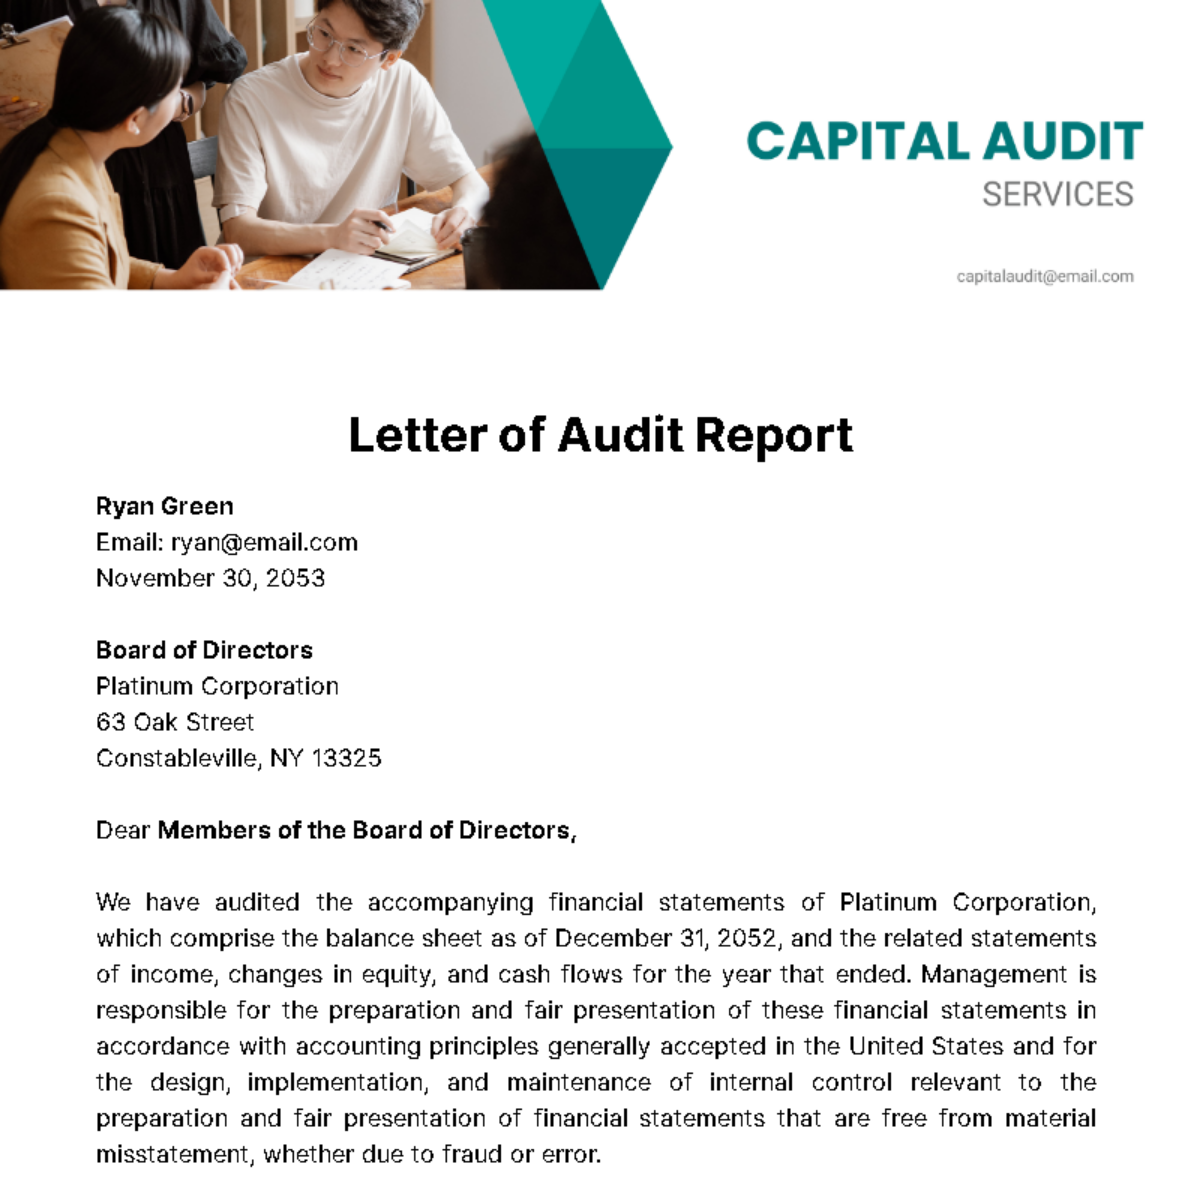 Letter of Audit Report  Template